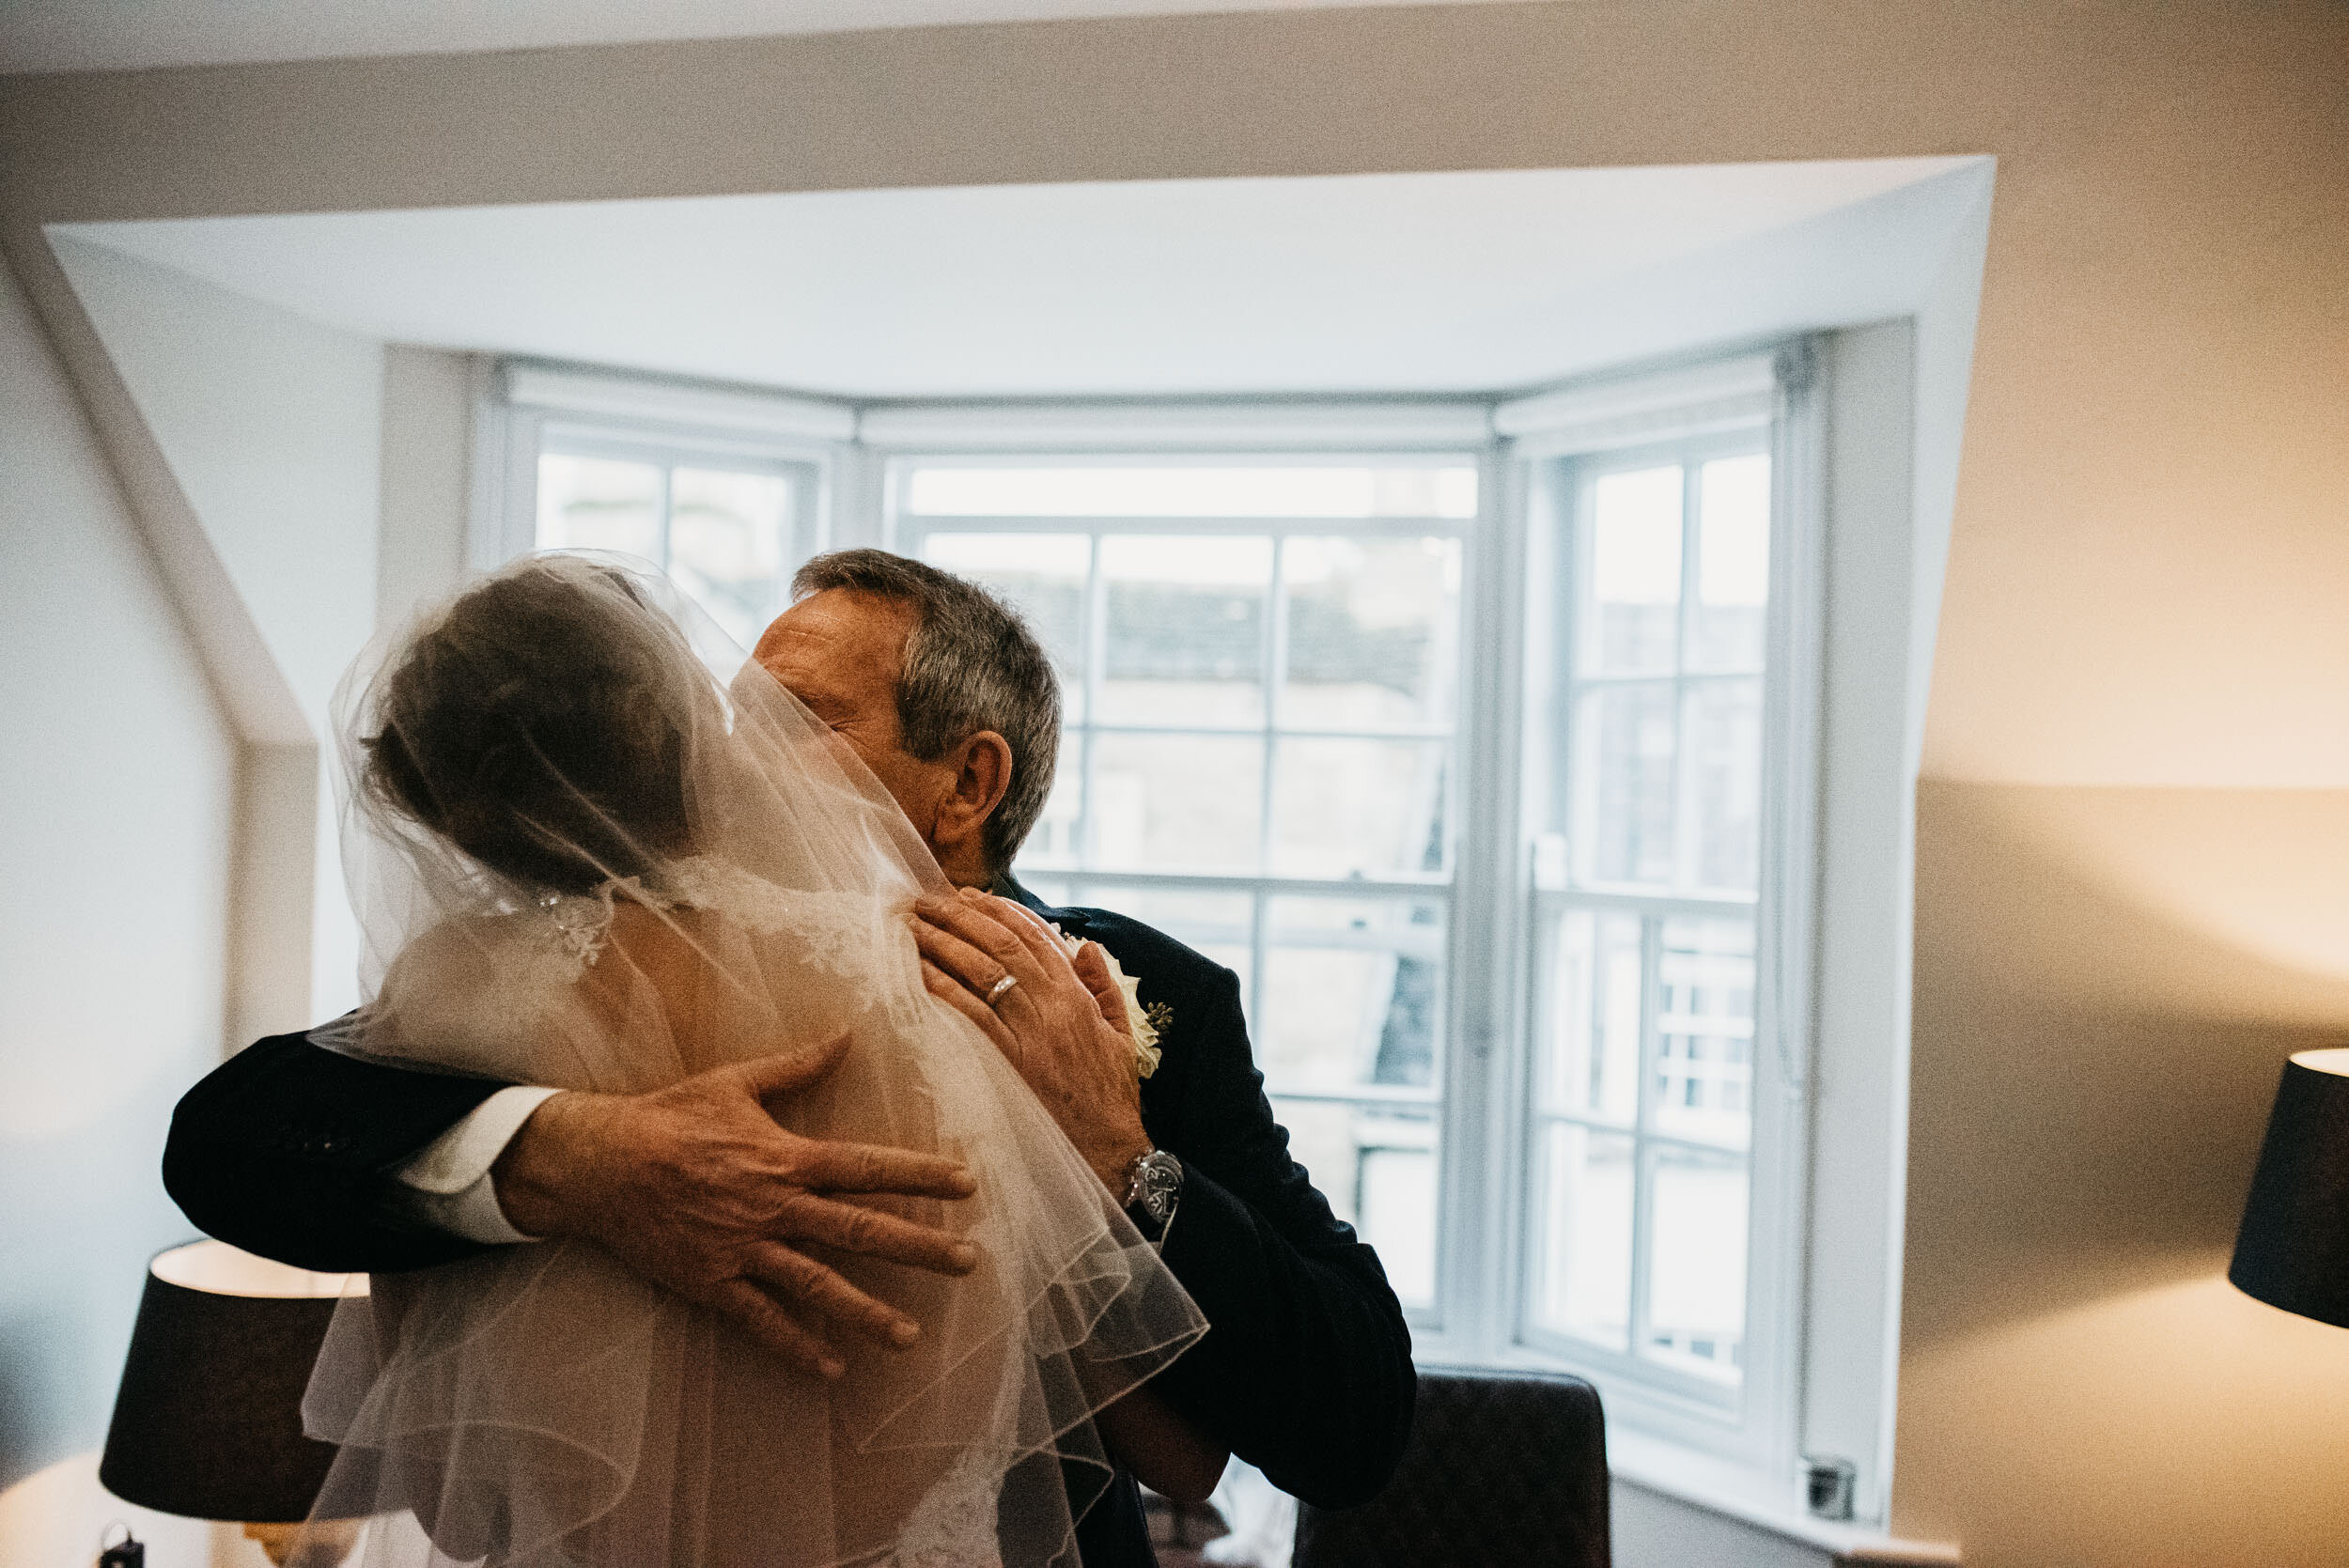 bride hugging her father